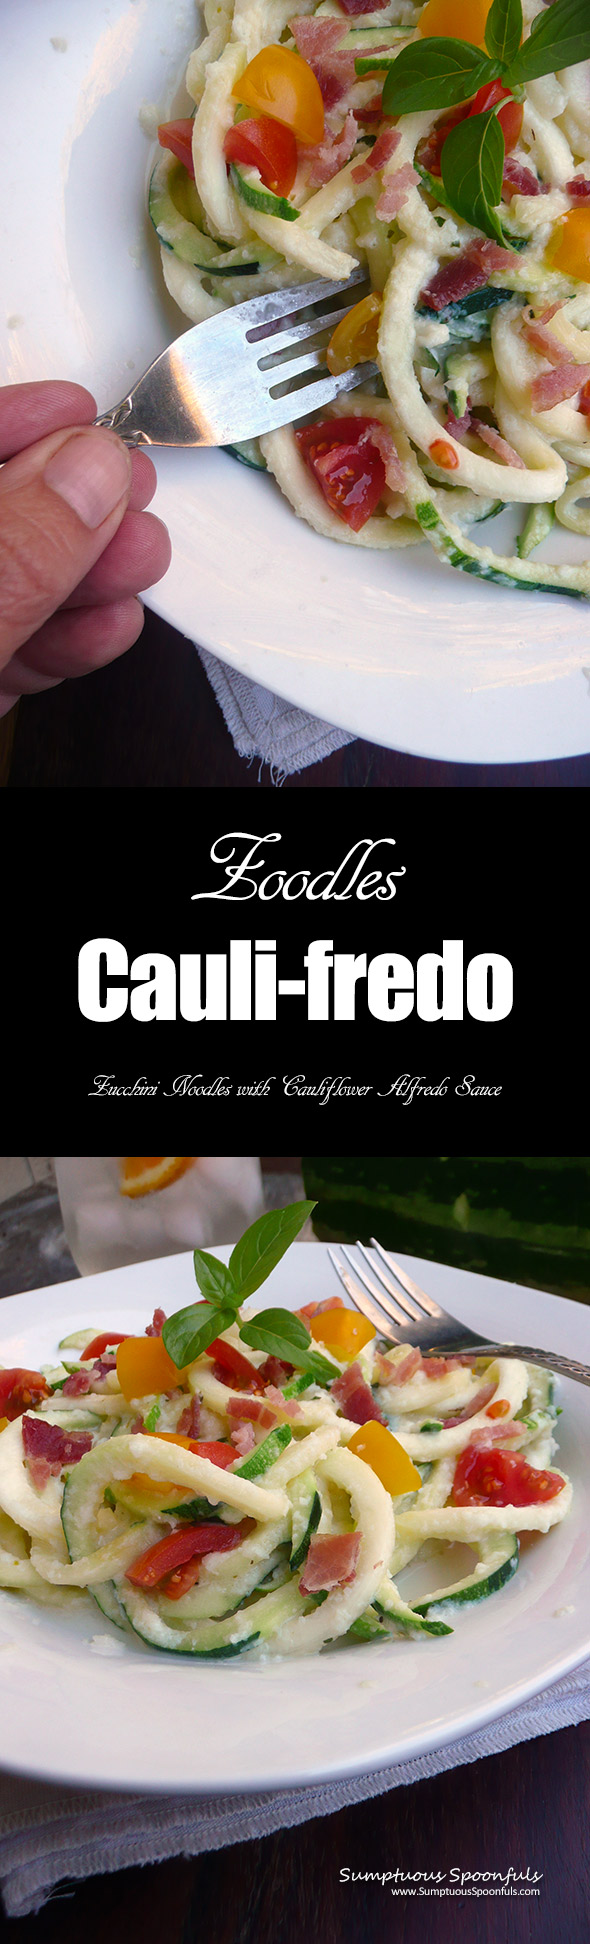 Zoodles Cauli-fredo ~ Zucchini Noodles with Cauliflower Alfredo Sauce ~ Sumptuous Spoonfuls #healthy #dinner #recipe